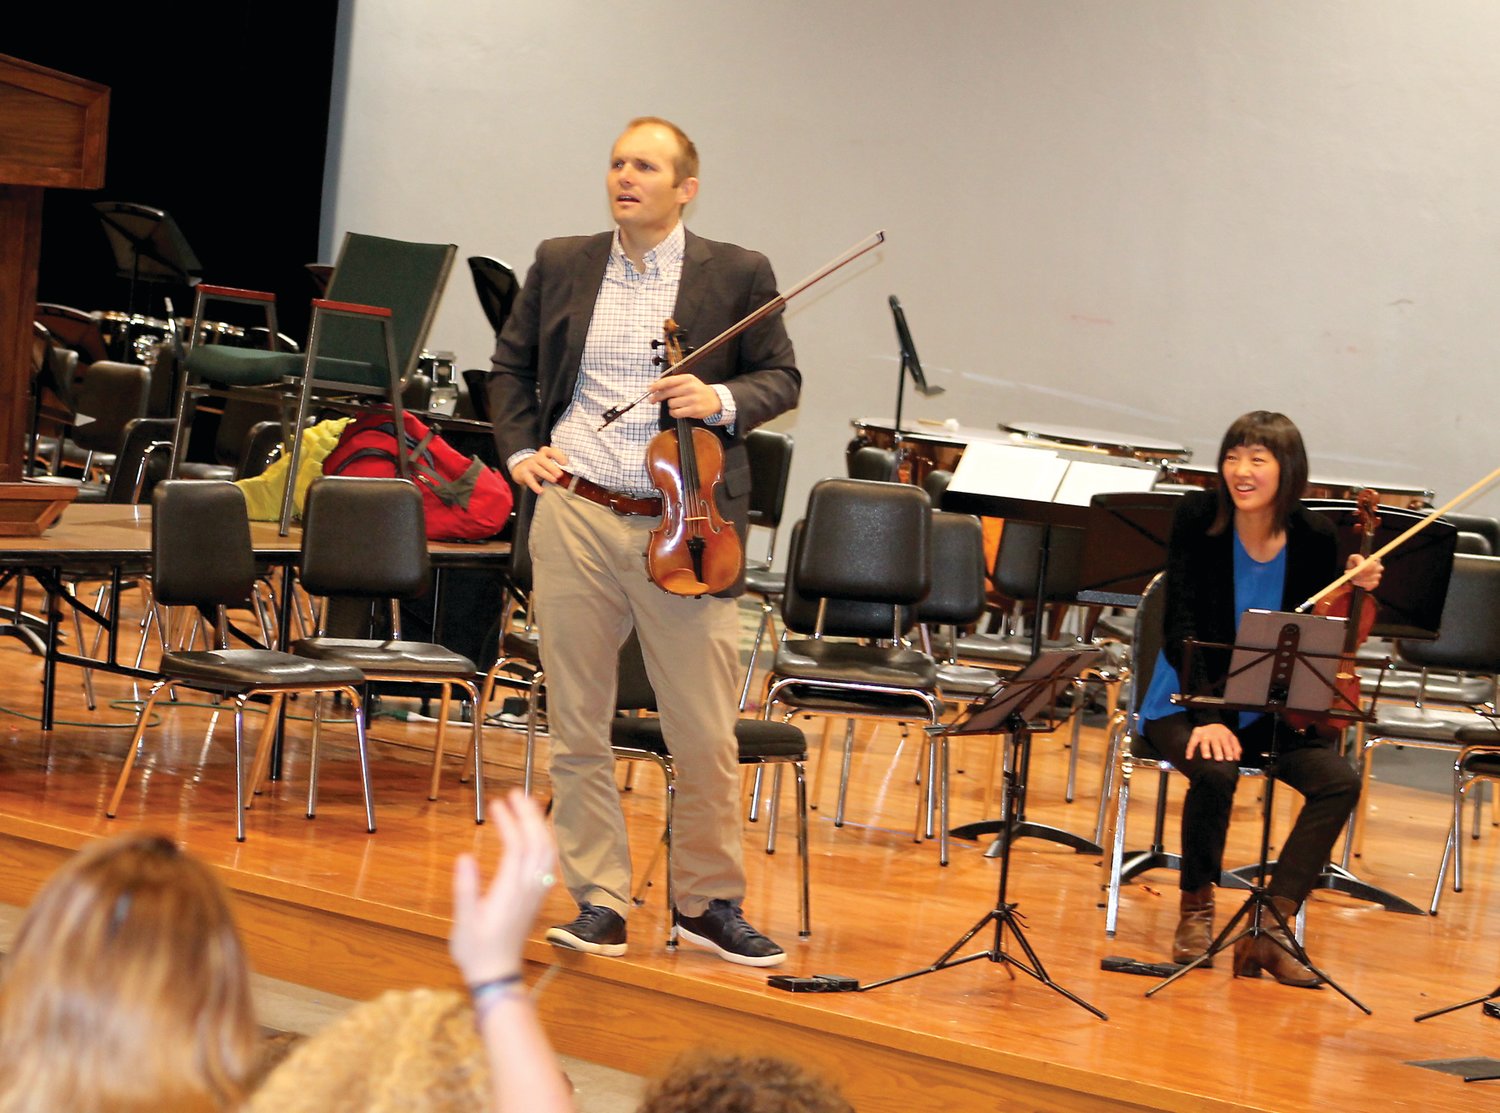 Violinists J. Freivogel and Karen Kim answer questions from students following the Jasper String Quartet’s morning performance at Holcong Middle School Dec. 5.